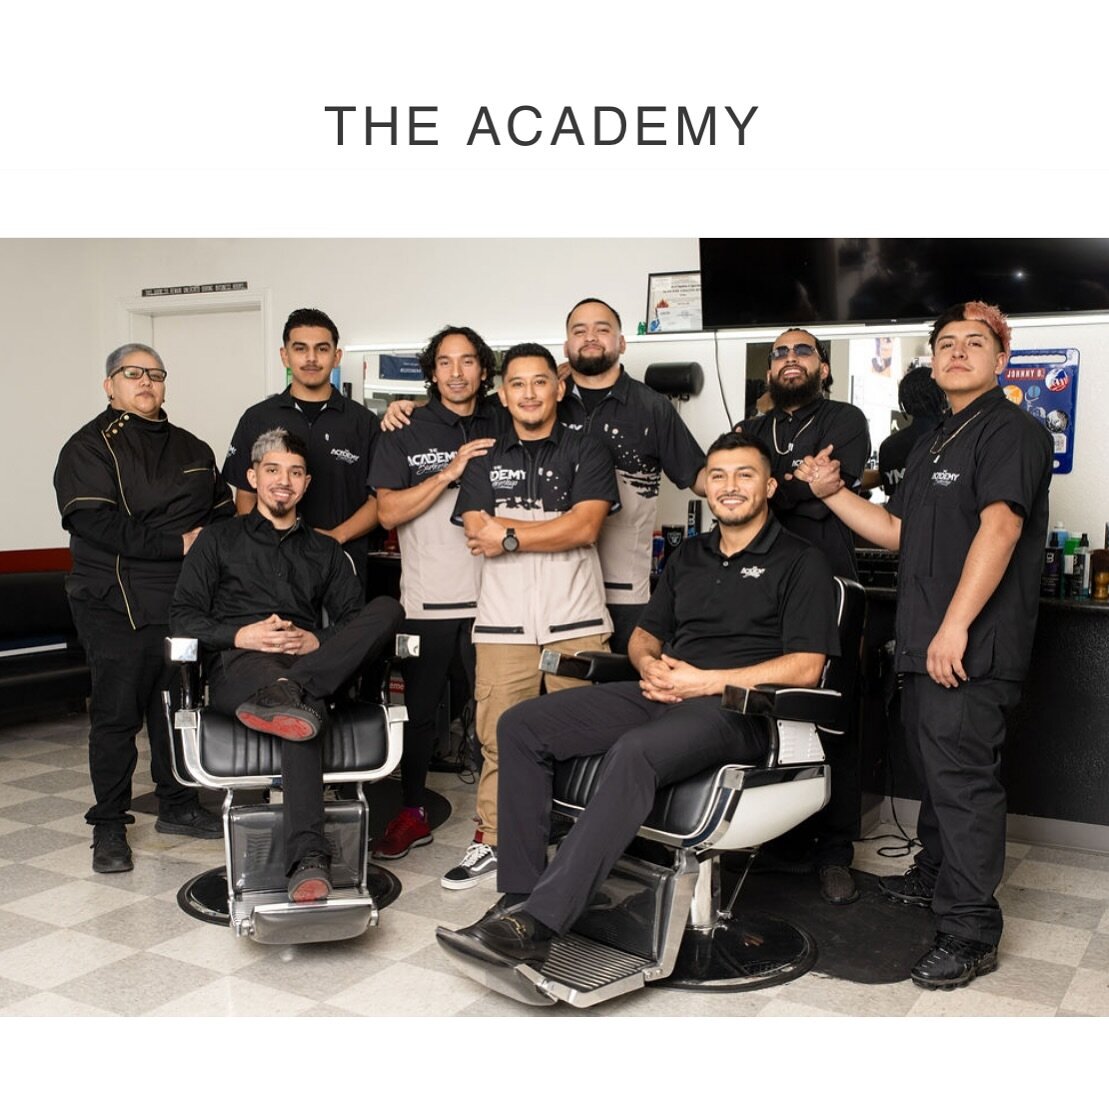 We at The Academy Barbershop welcome you. 
Booking available through app, online, or in person. 
Www.TheAcademyBarbershop.com